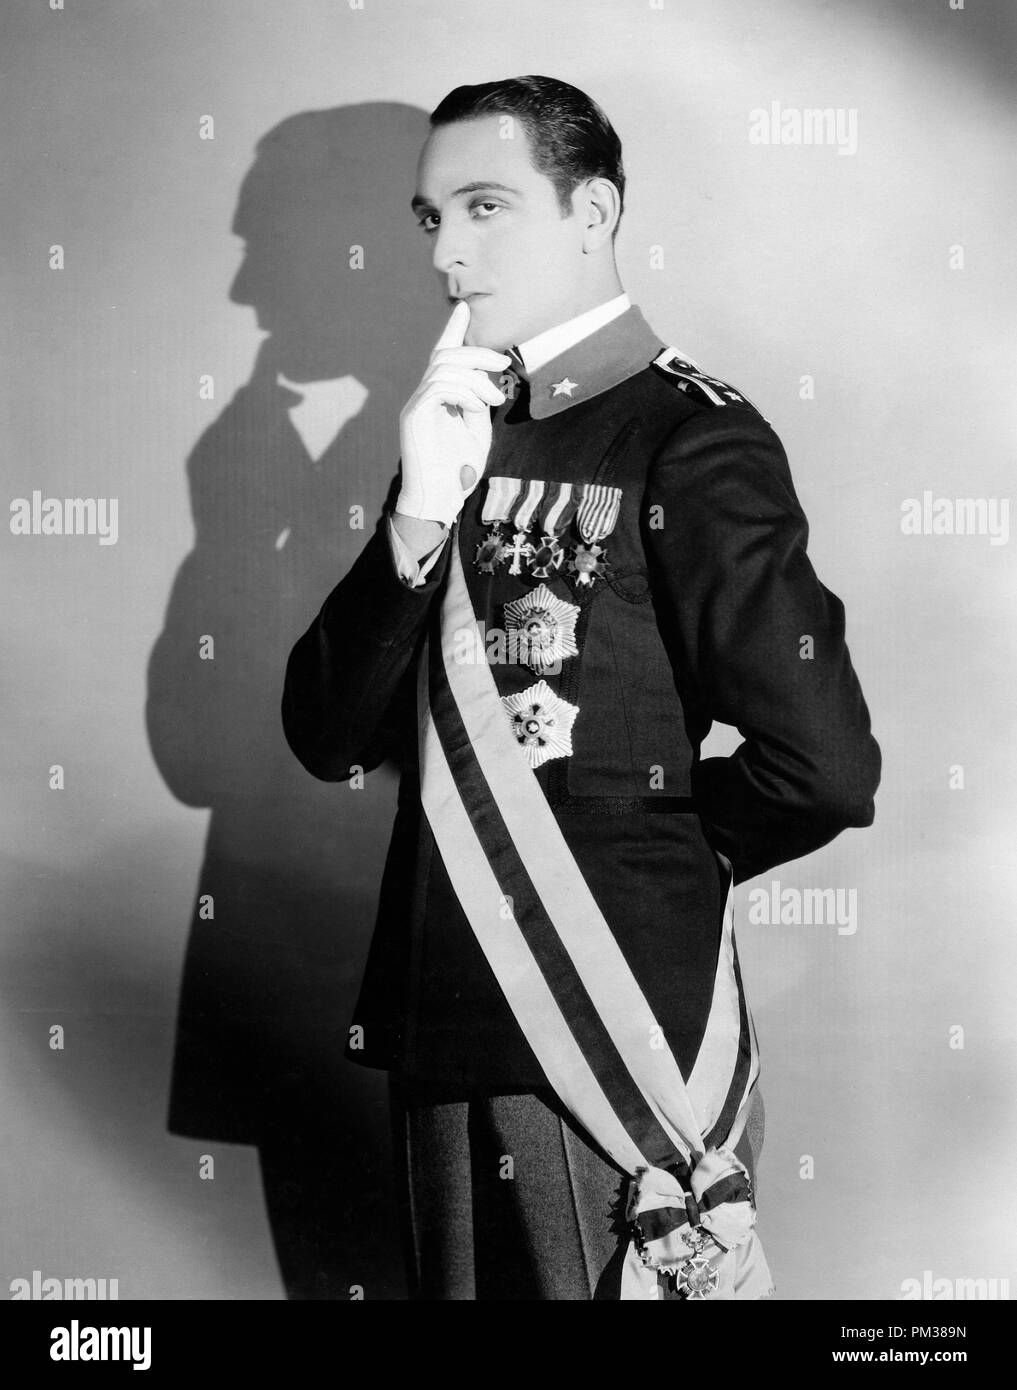 Silent film still. Portrait of a man wearing a high ranking military uniform with many medals pinned on his jacket, 1925.  File Reference # 1183 006THA Stock Photo